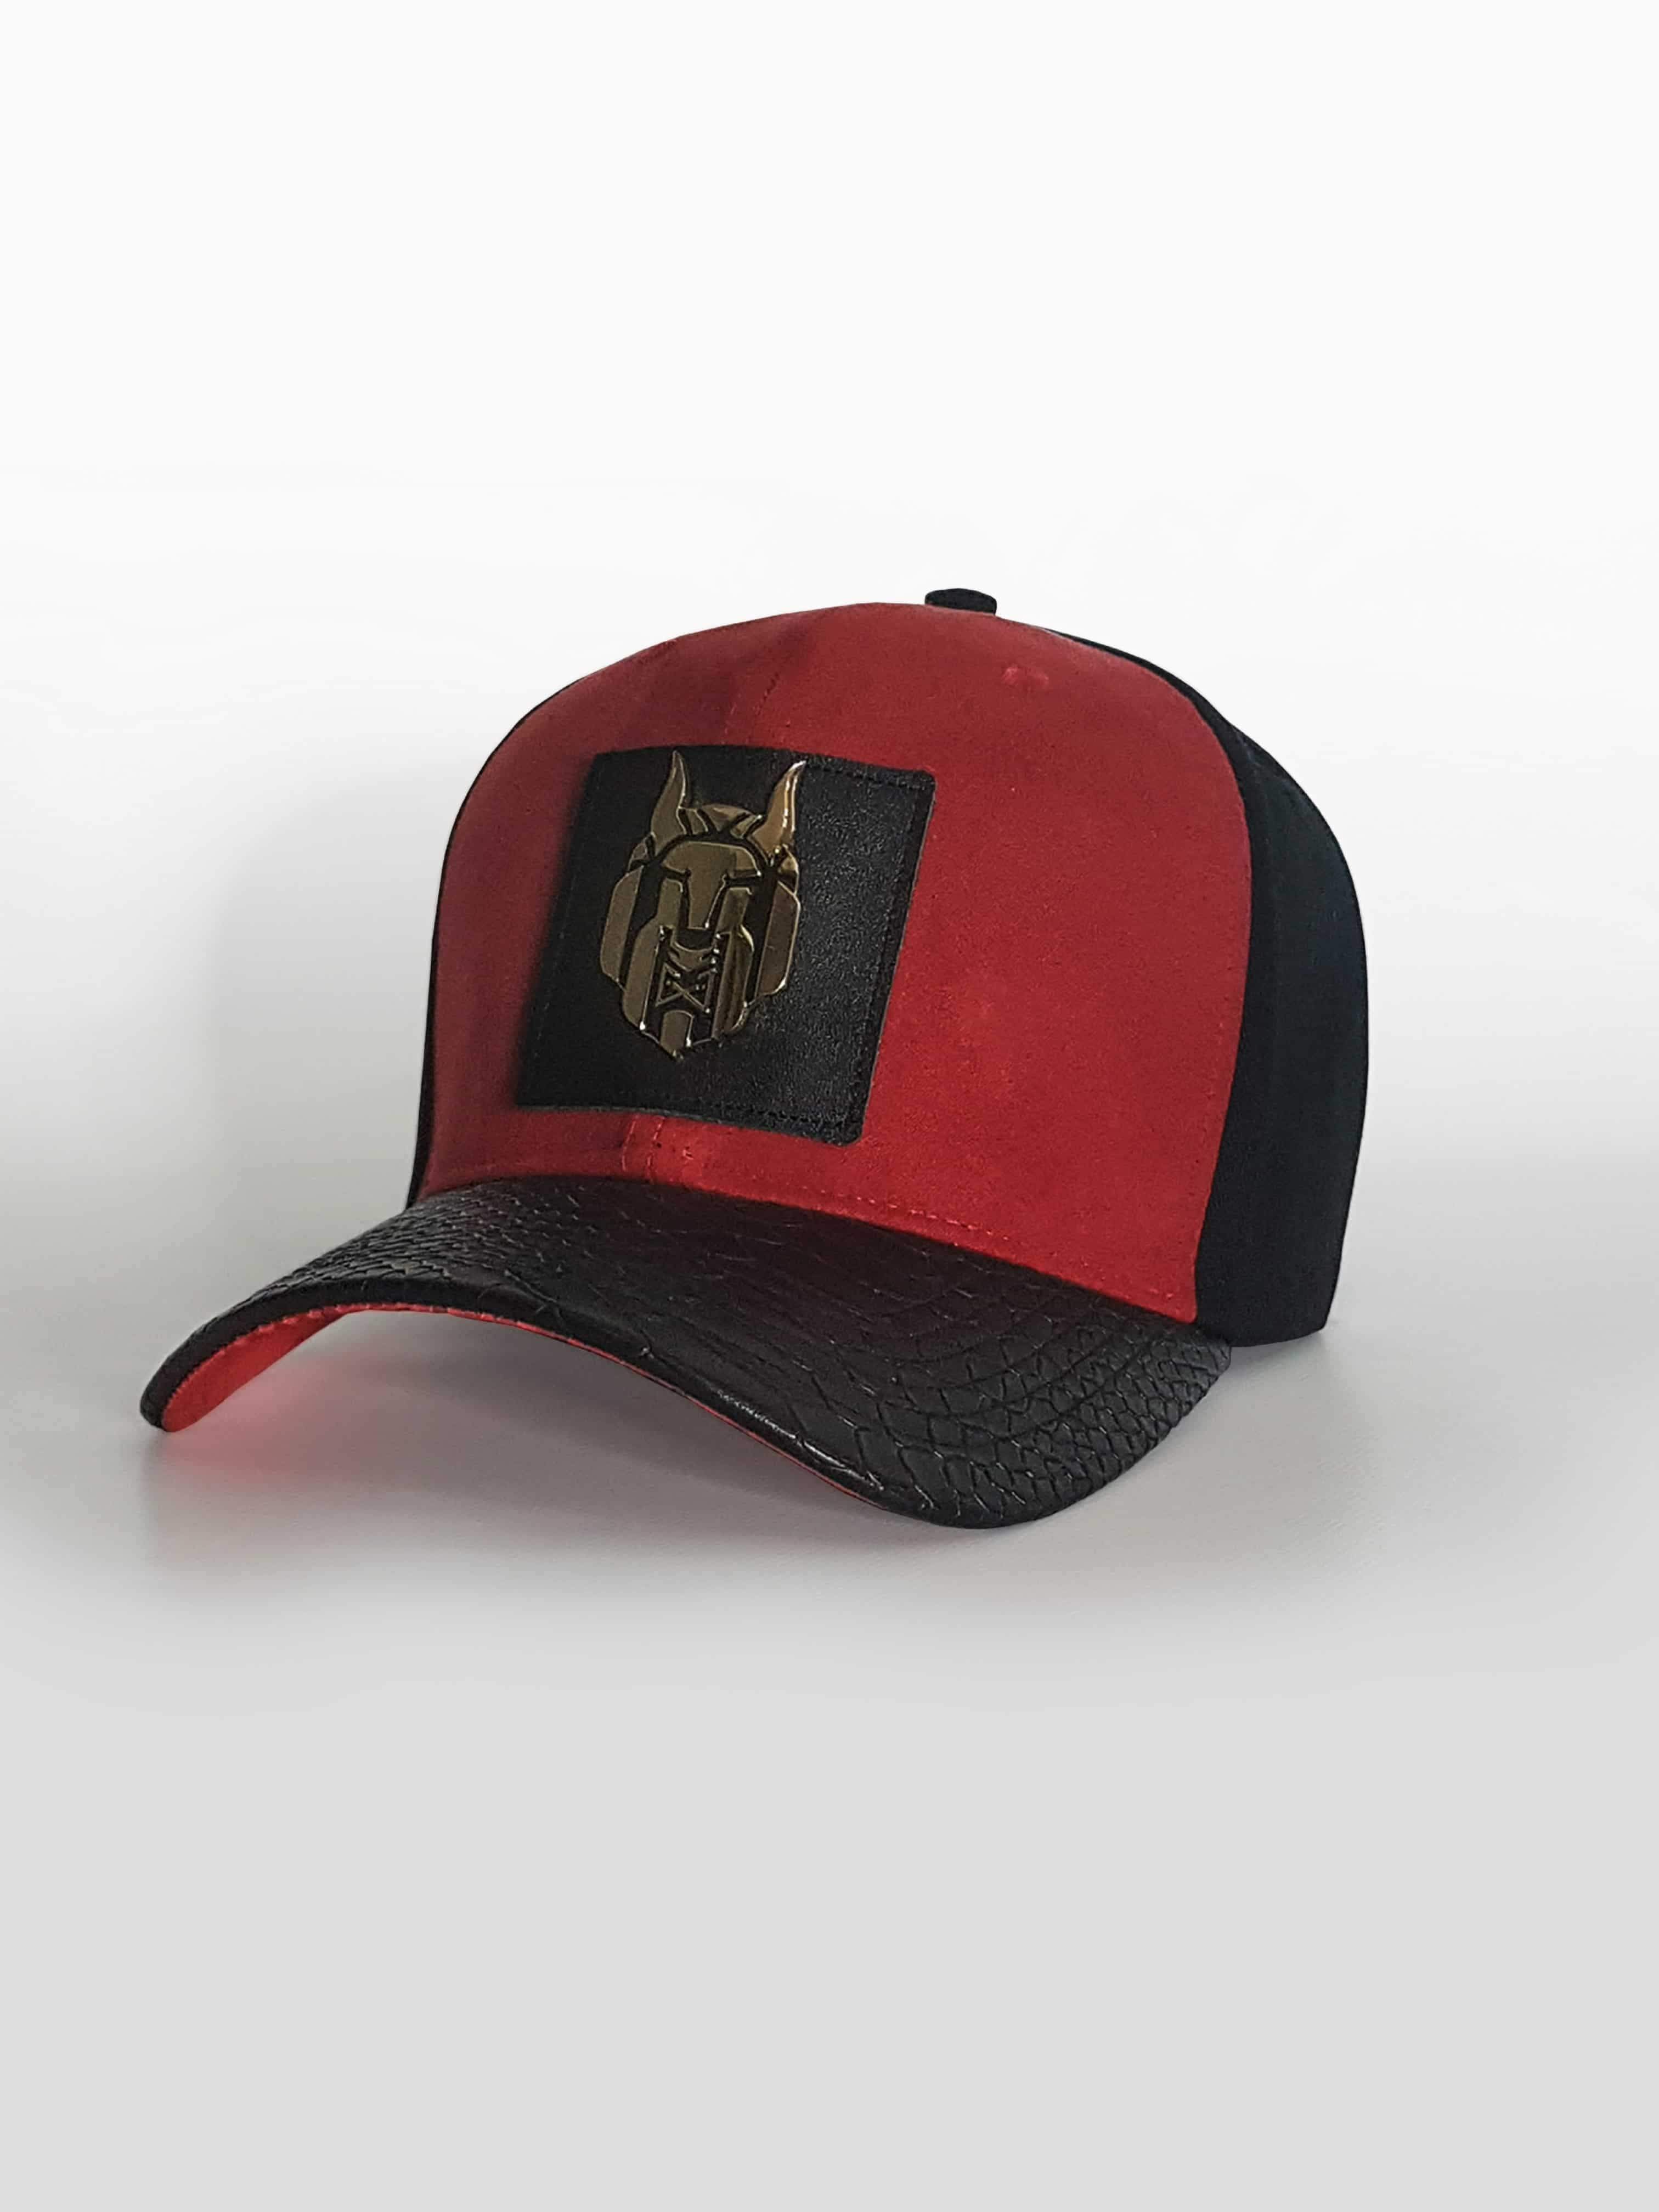 MEN WOLVEZ NOT SHEEP RED SUEDE HAT - Brit Boss 